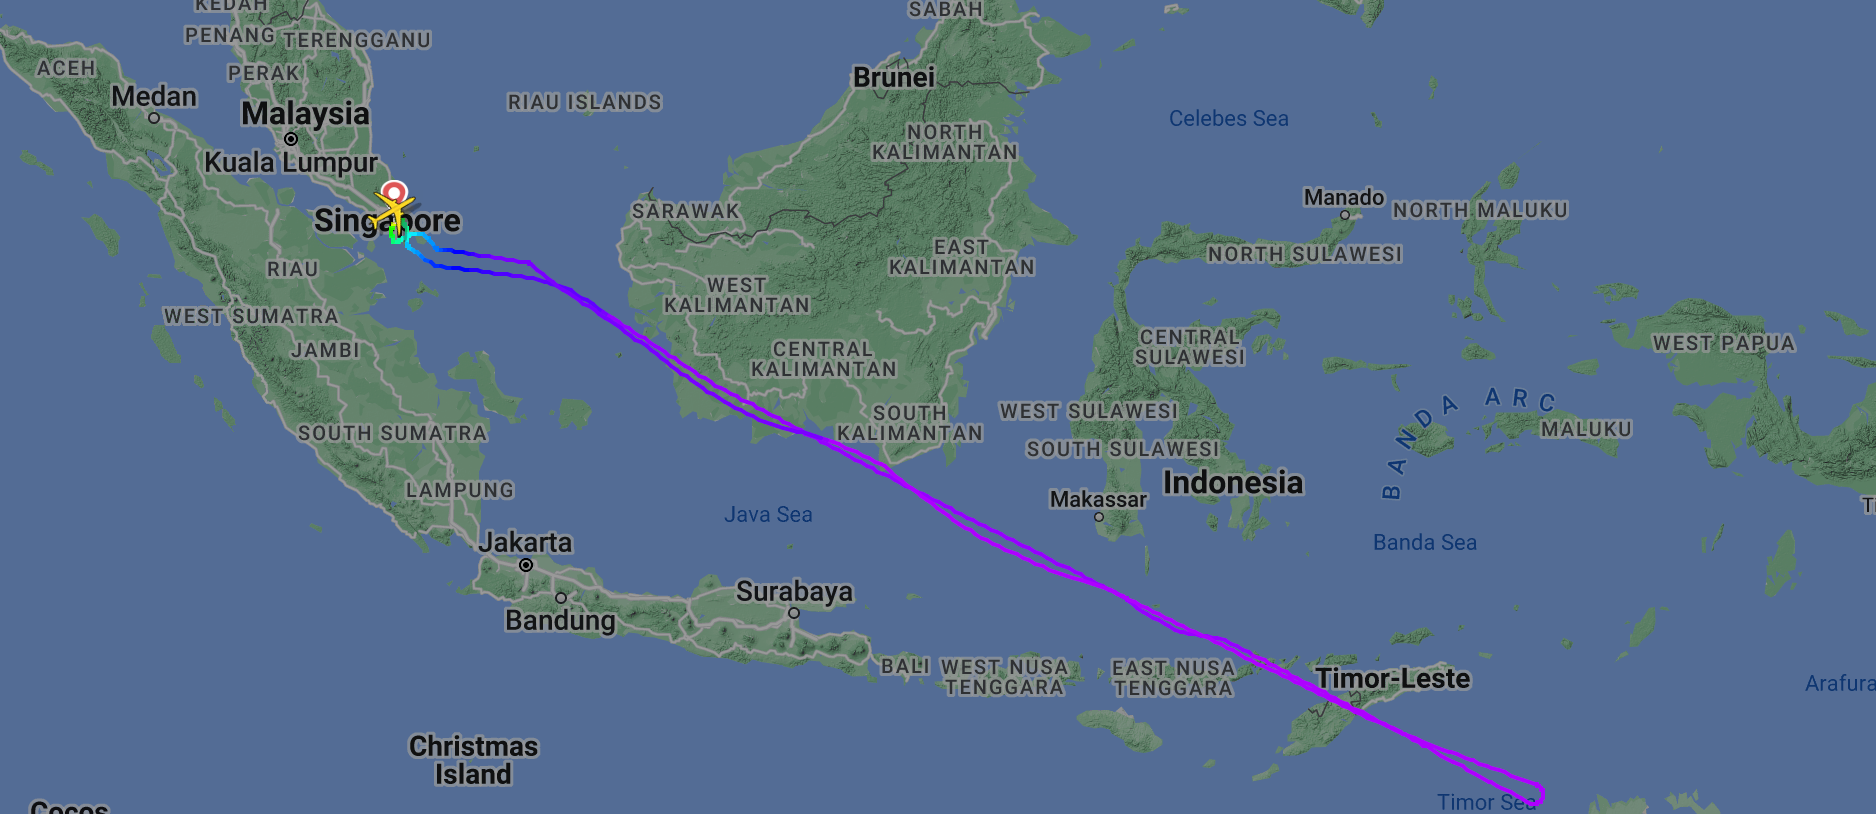 A Singapore Airlines flight from Singapore to Auckland was in the air the longest